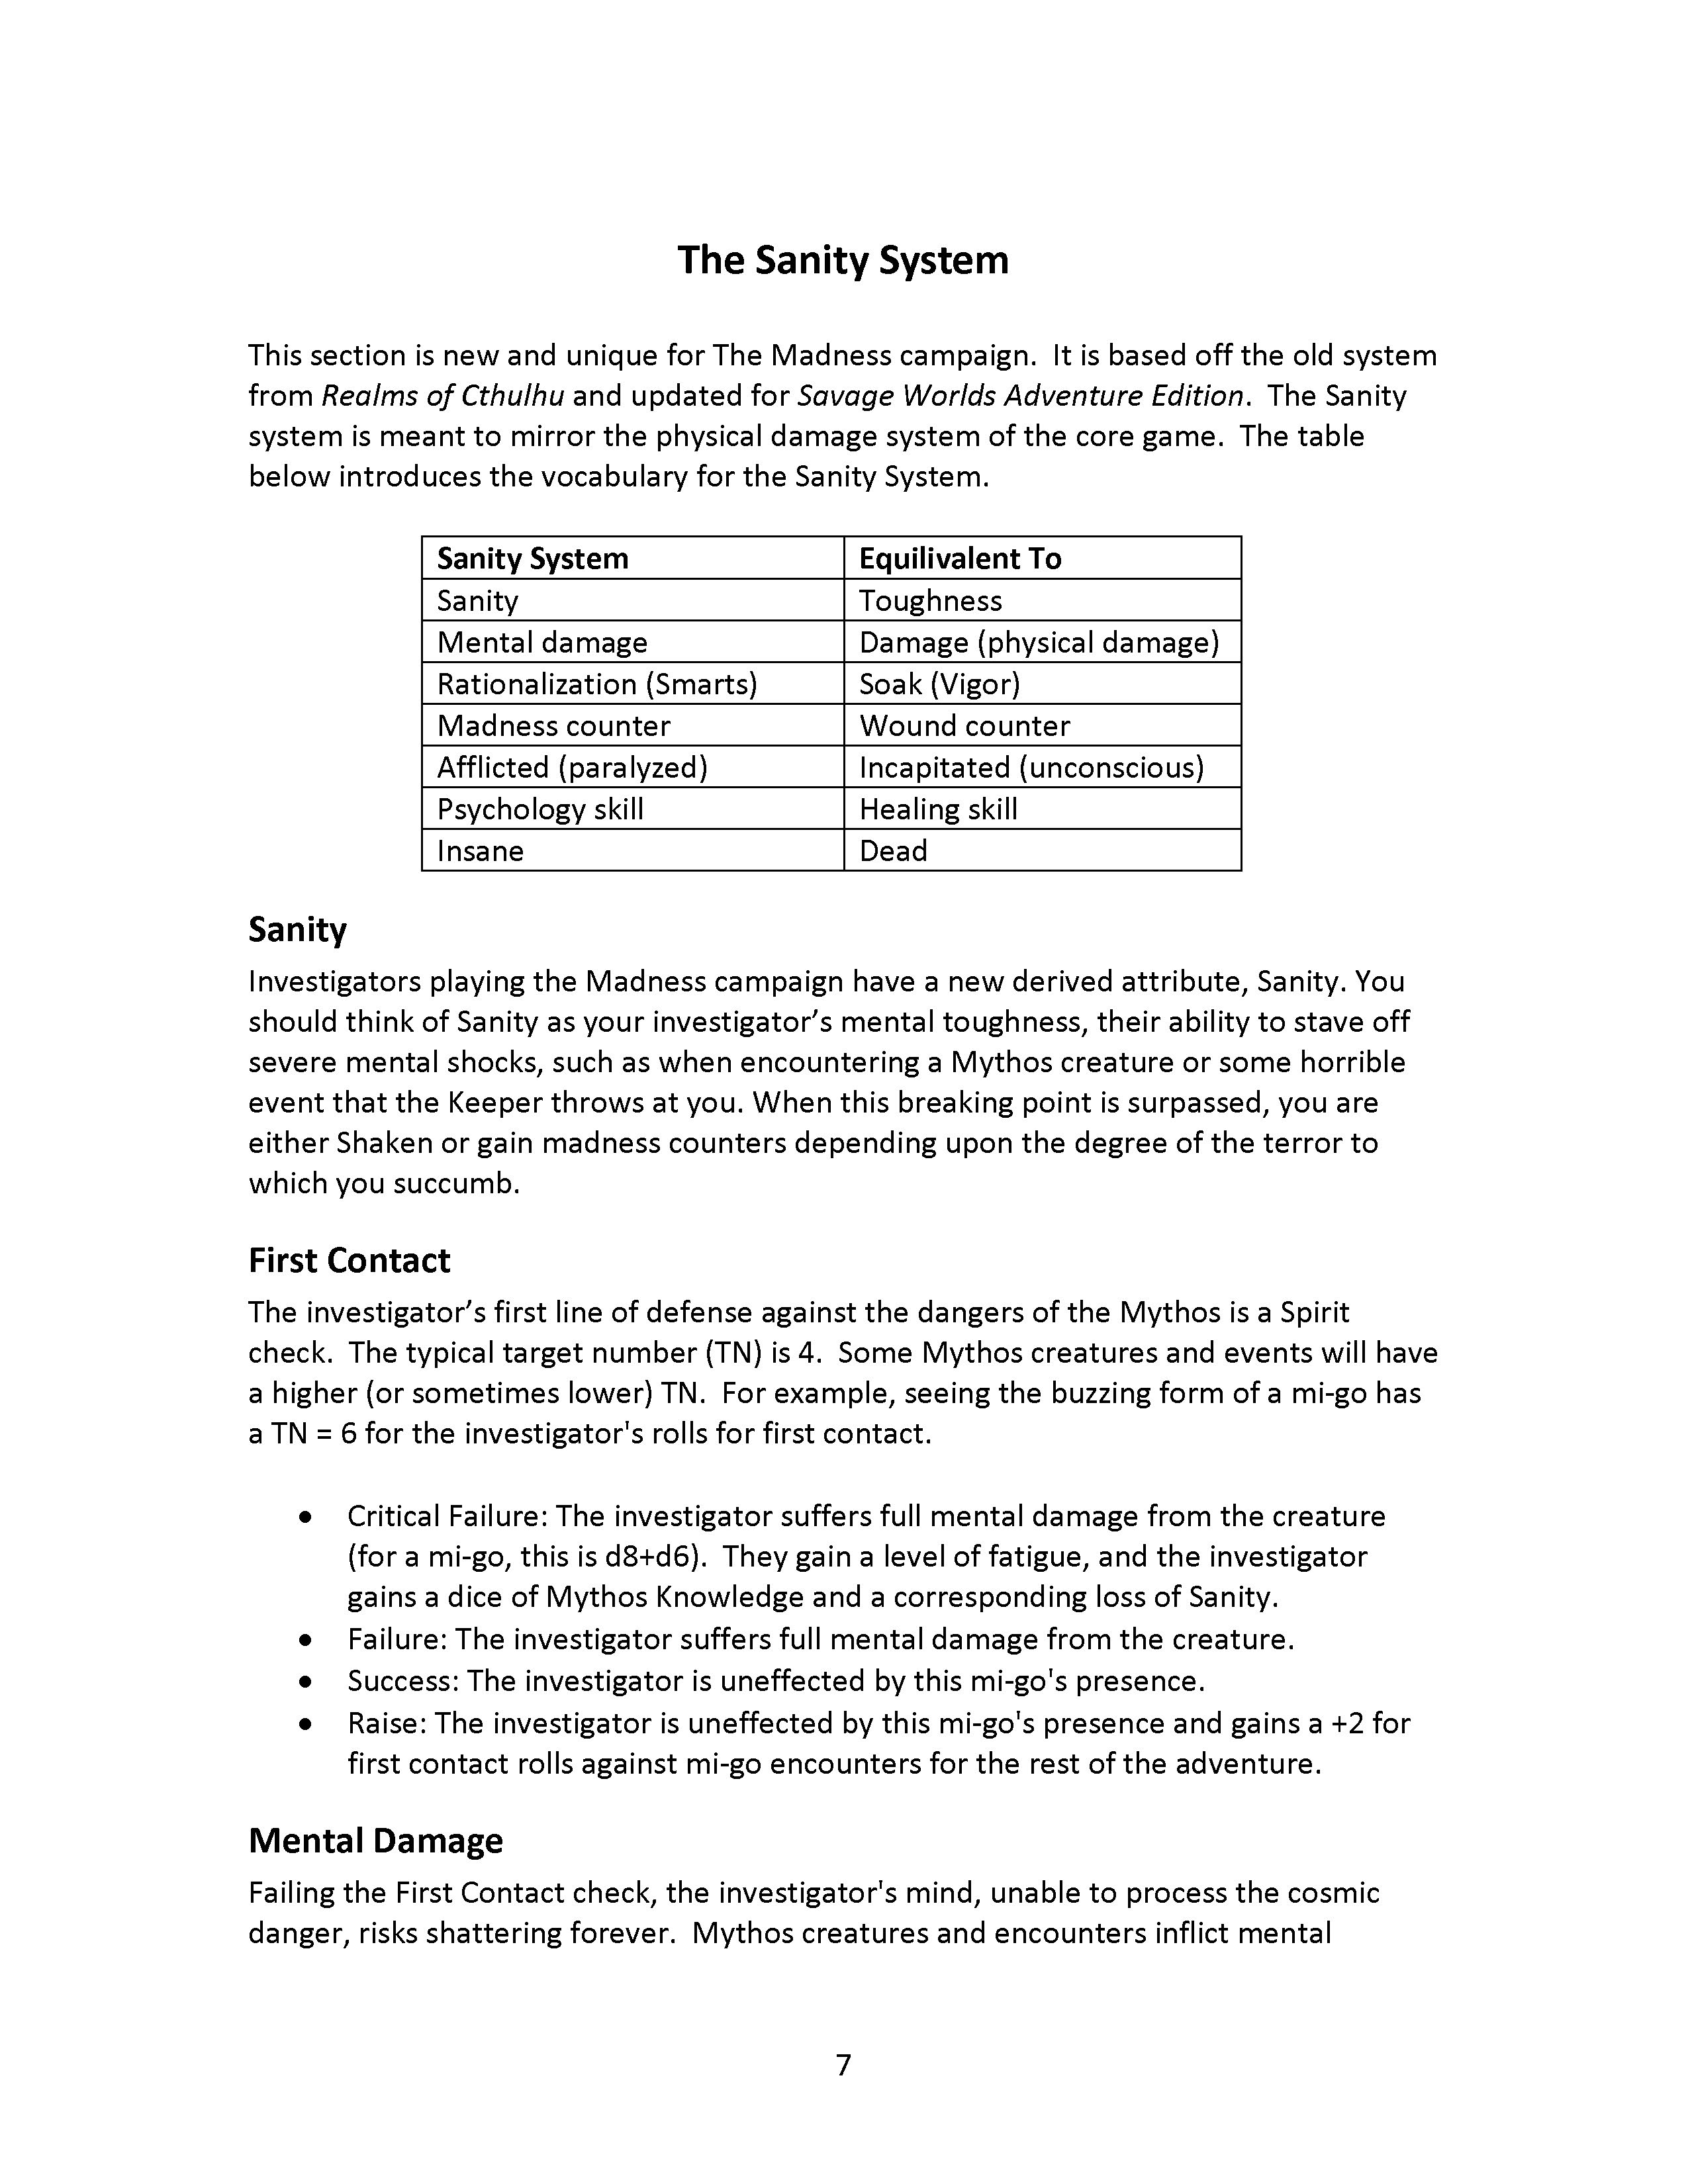 The Madness House Rules Page 08.jpg